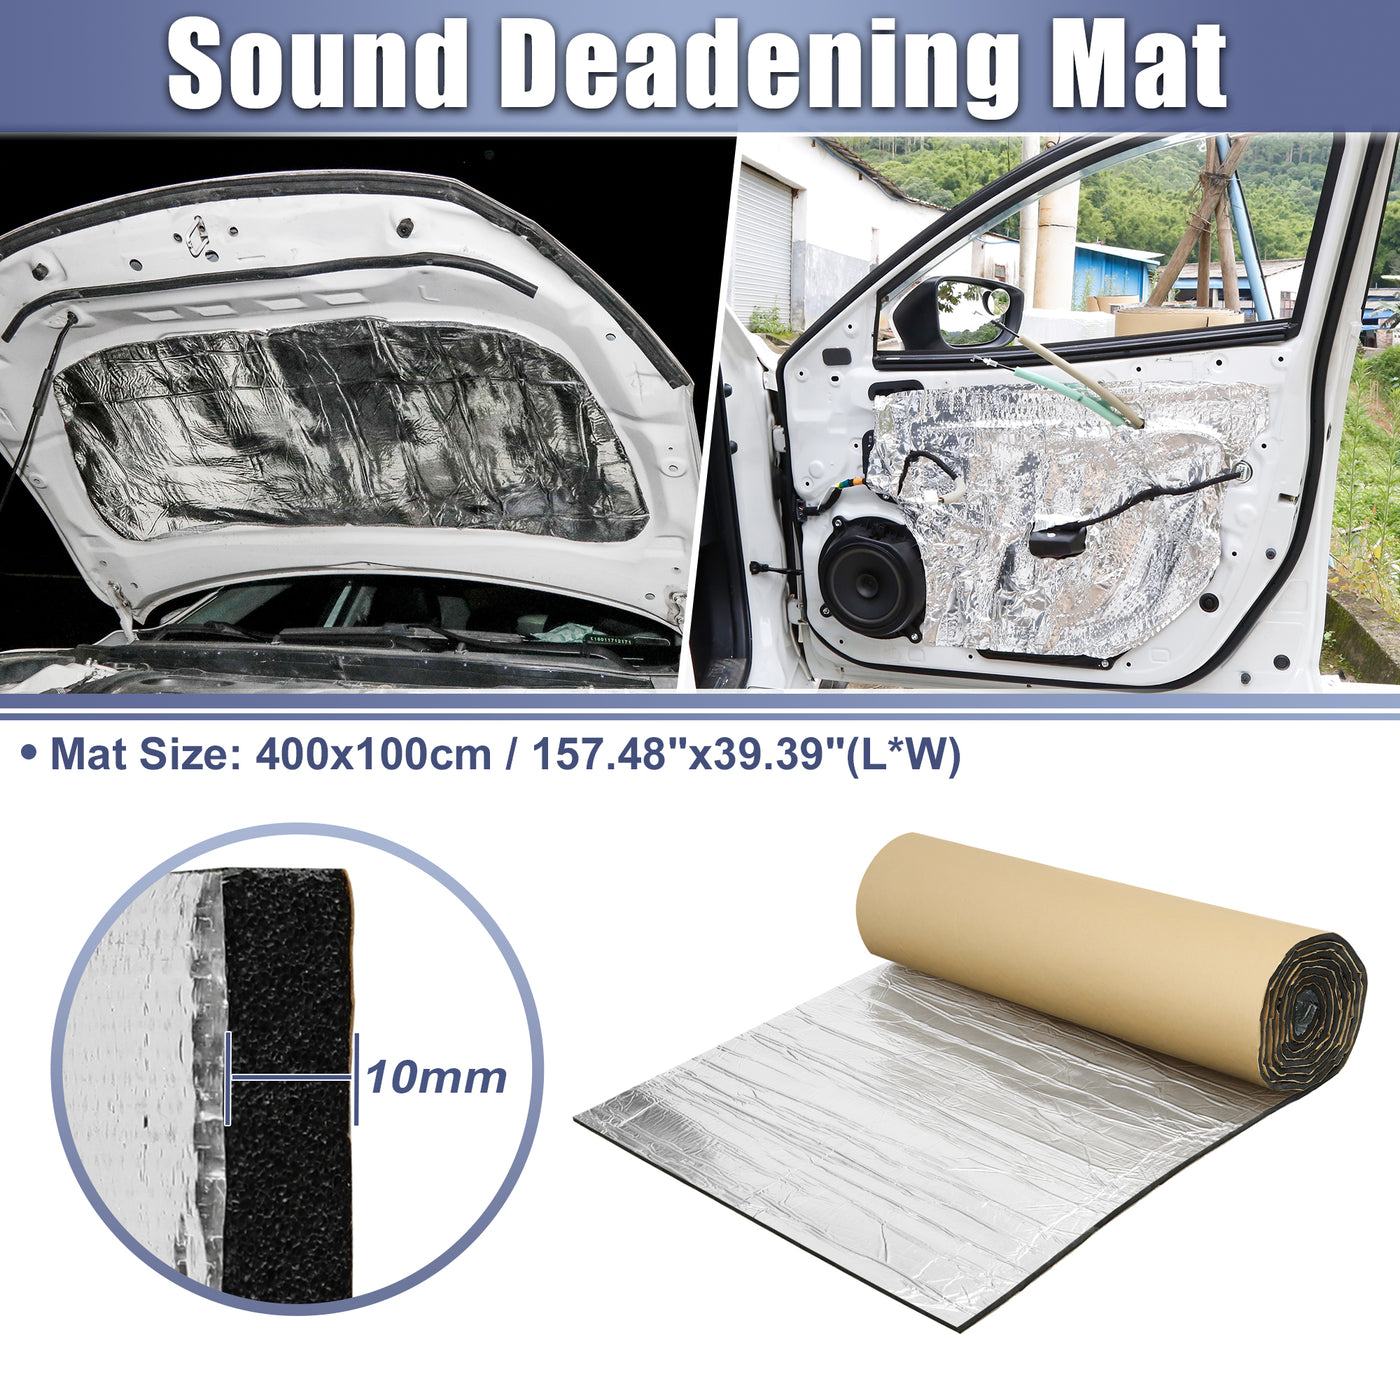 X AUTOHAUX 394mil 10mm 43.05sqft Car Sound Deadening Mat Glassfiber Closed Cell Foam Heat Shield Material Damping Self Adhesive Universal for Hood Fender and Boat Engine Cover 157.48"x39.37"